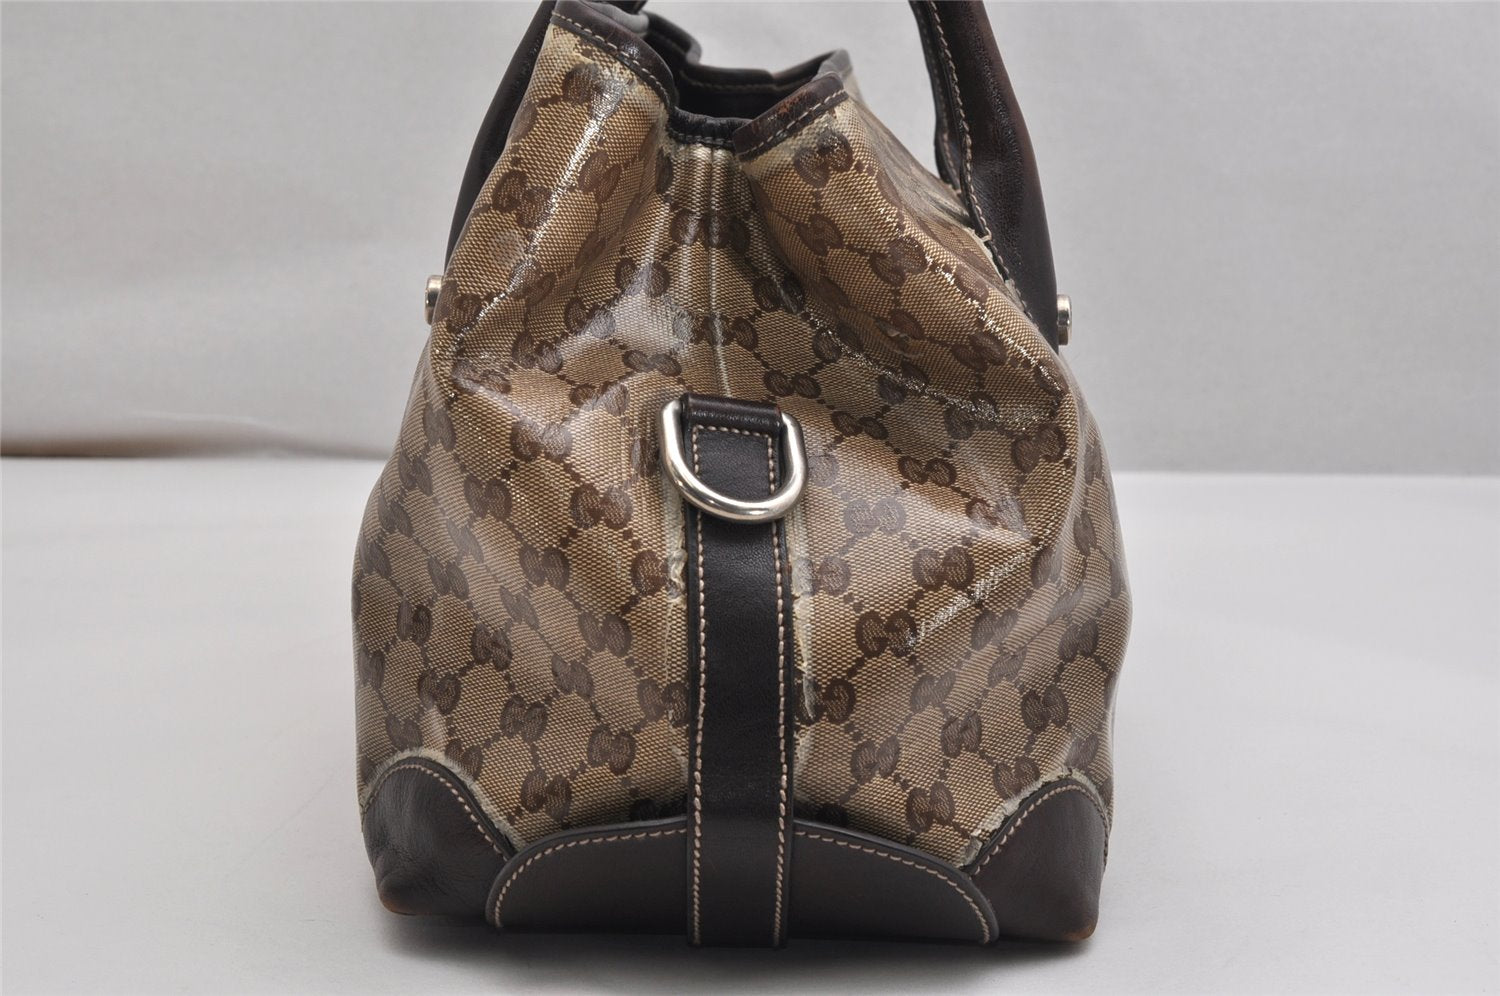 Authentic GUCCI Crest GG Crystal 2Way Tote Bag GG PVC Leather 181494 Brown 9886J